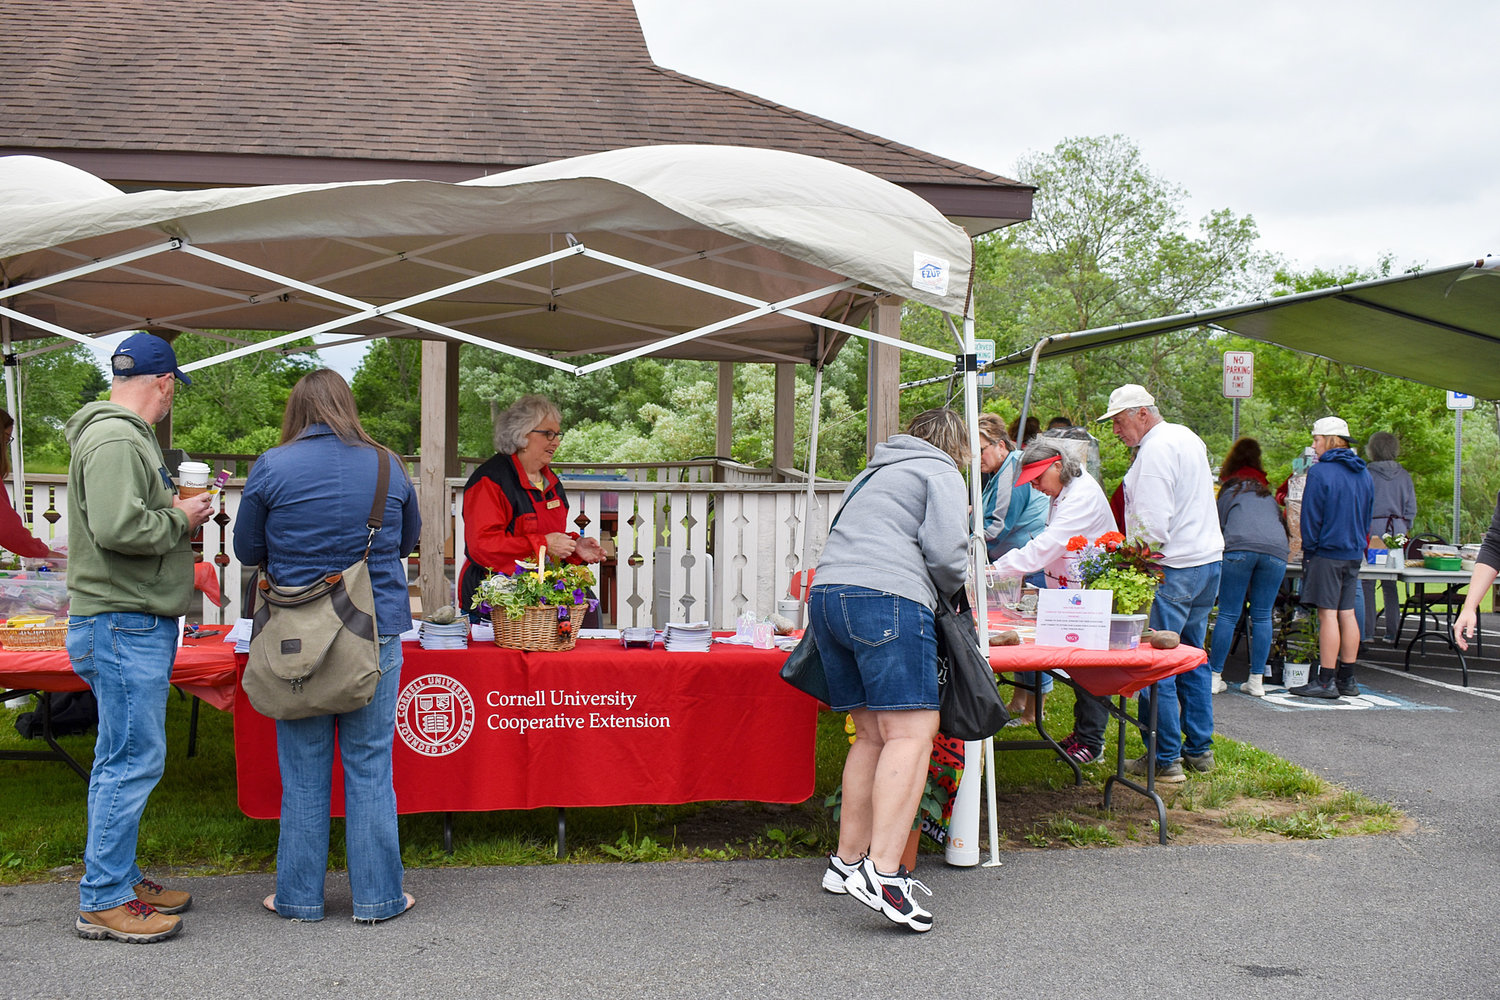 Cold temperatures and cloudy skies didn't keep attendees away from the recent Herb and Flower Festival as almost 800 people attended the event hosted at the Oneida County Farm & Home Center, 121 Second St. in Oriskany.